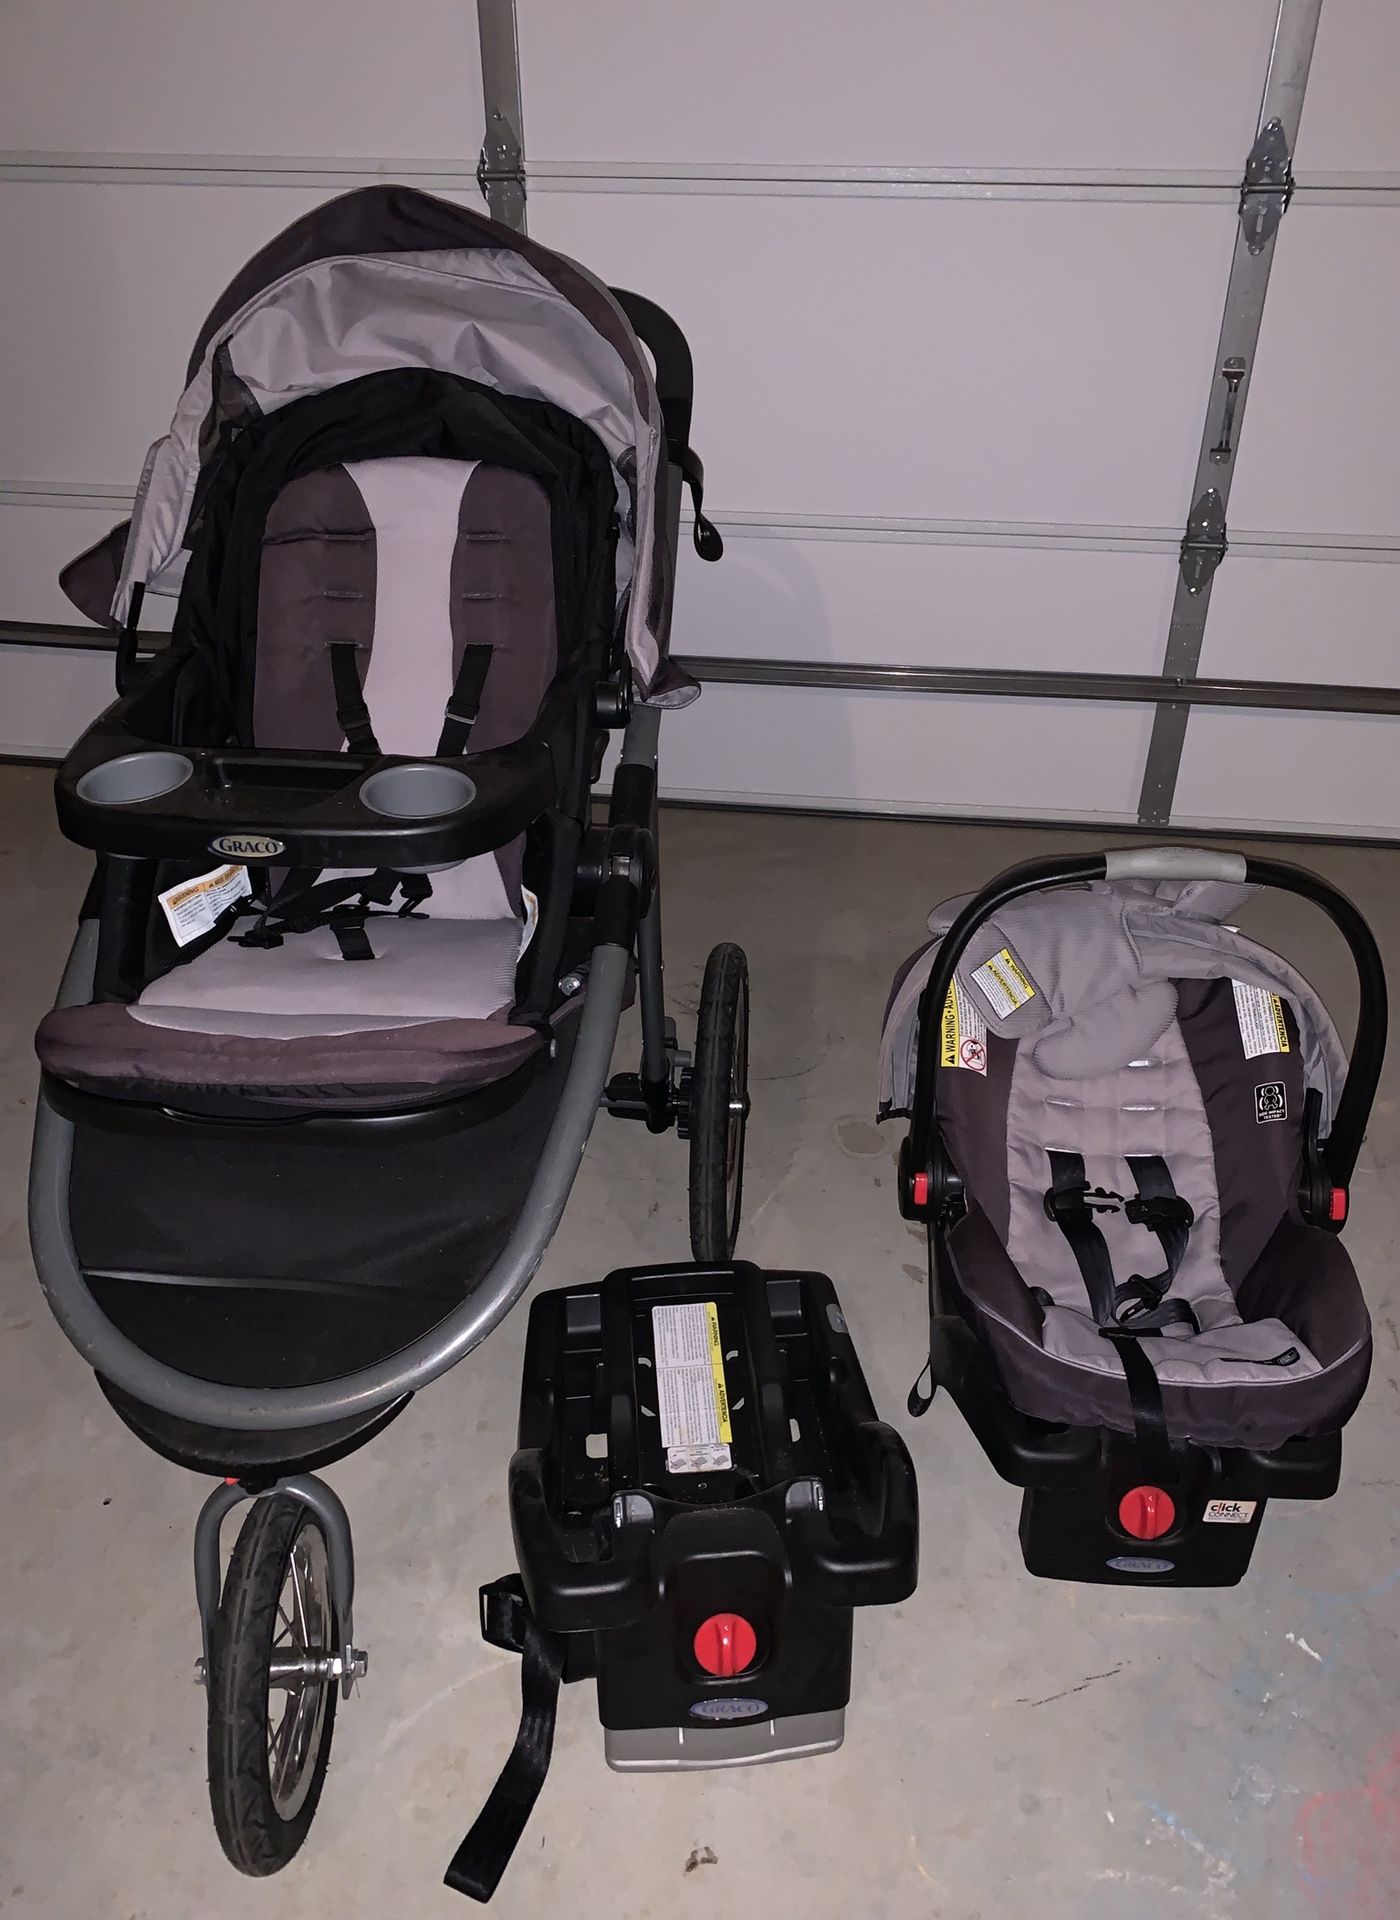 Graco infant car seat, jogging stroller and two car seat bases!